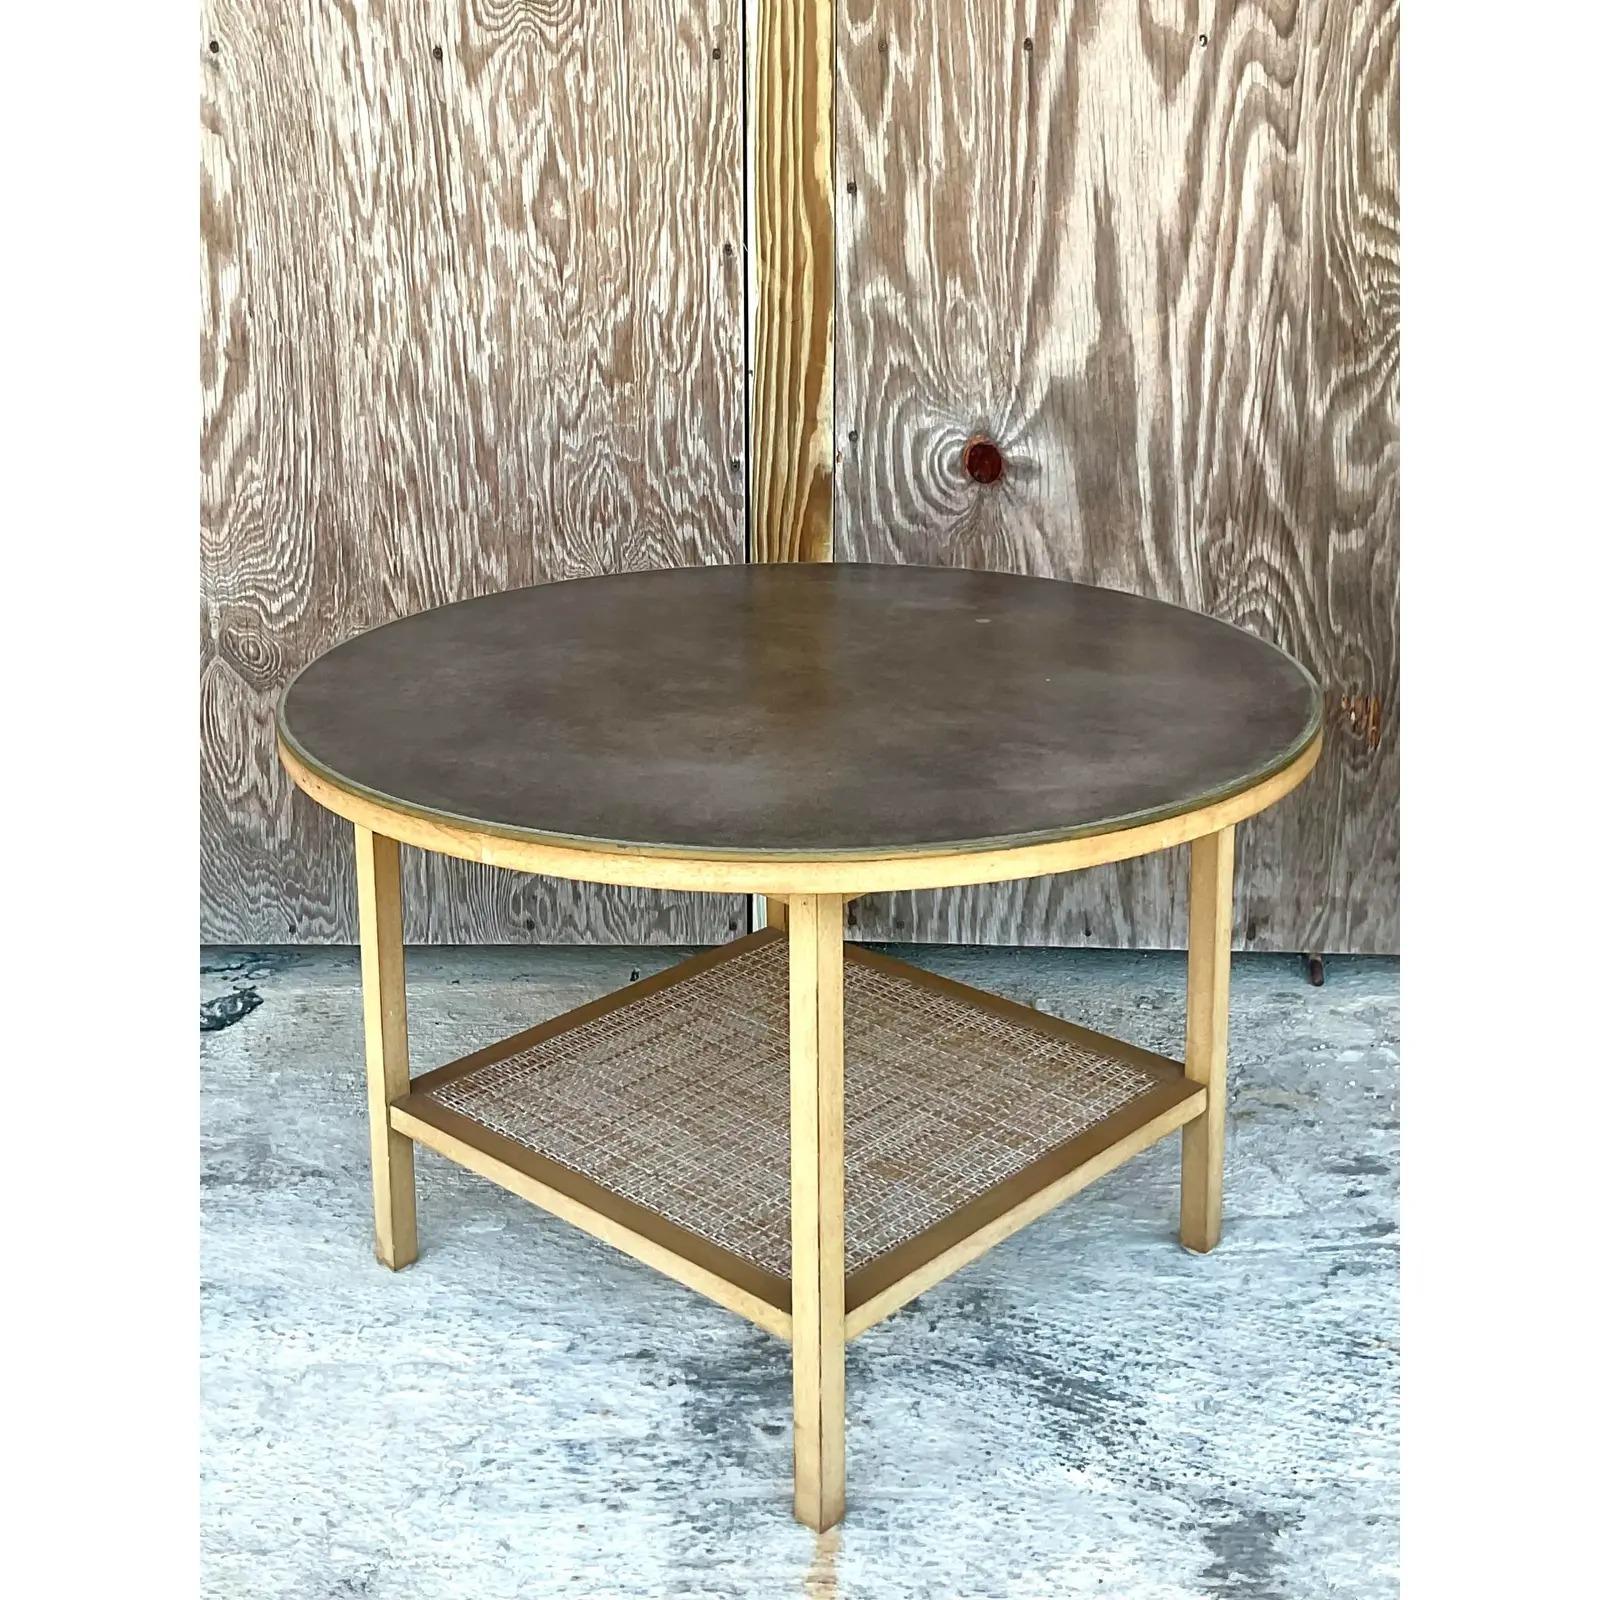 Fantastic vintage MCM side table. A chic round shape with an inset leather top and woven rattan second shelf. Made by the iconic Paul McCobb and designed for Calvin. Part of the coveted Irwin collection. Perfect as a side table or a coffee table.